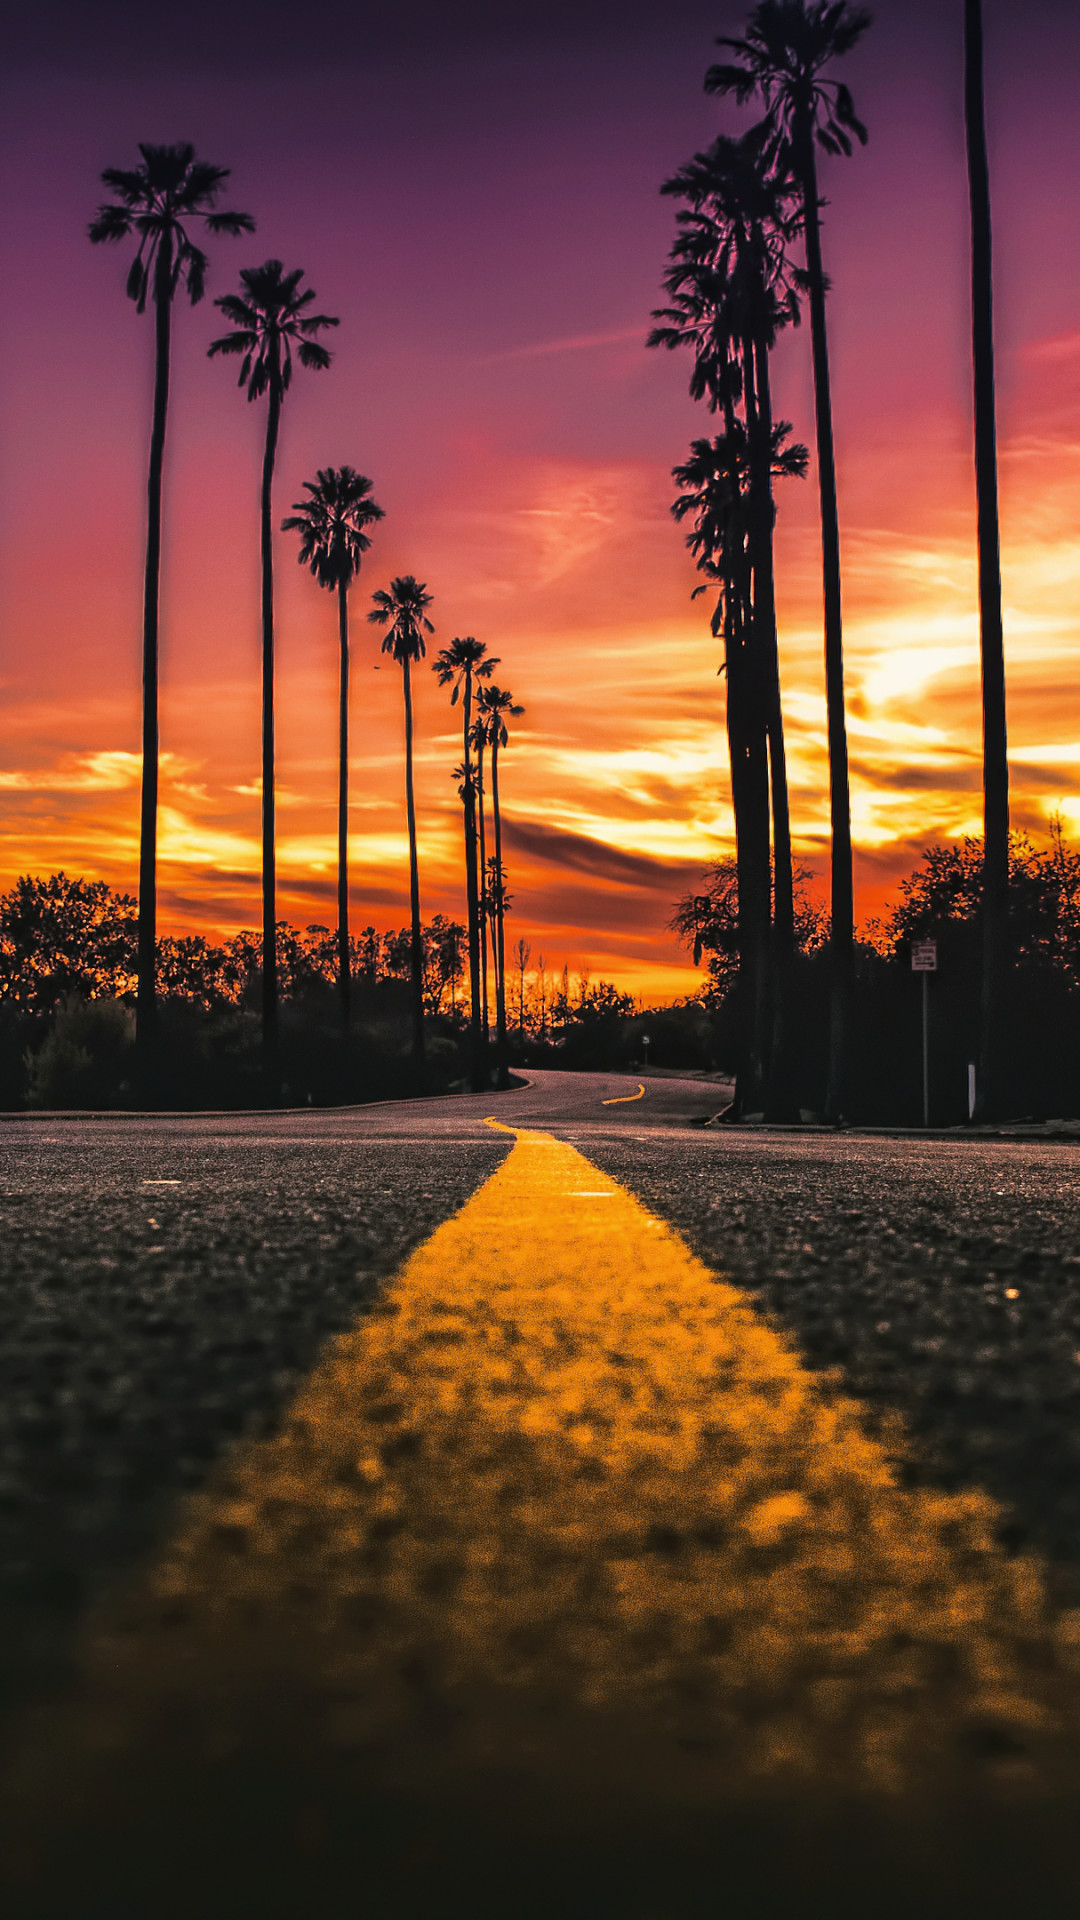 Stock Images Los Angeles, California, road, palms, sunset